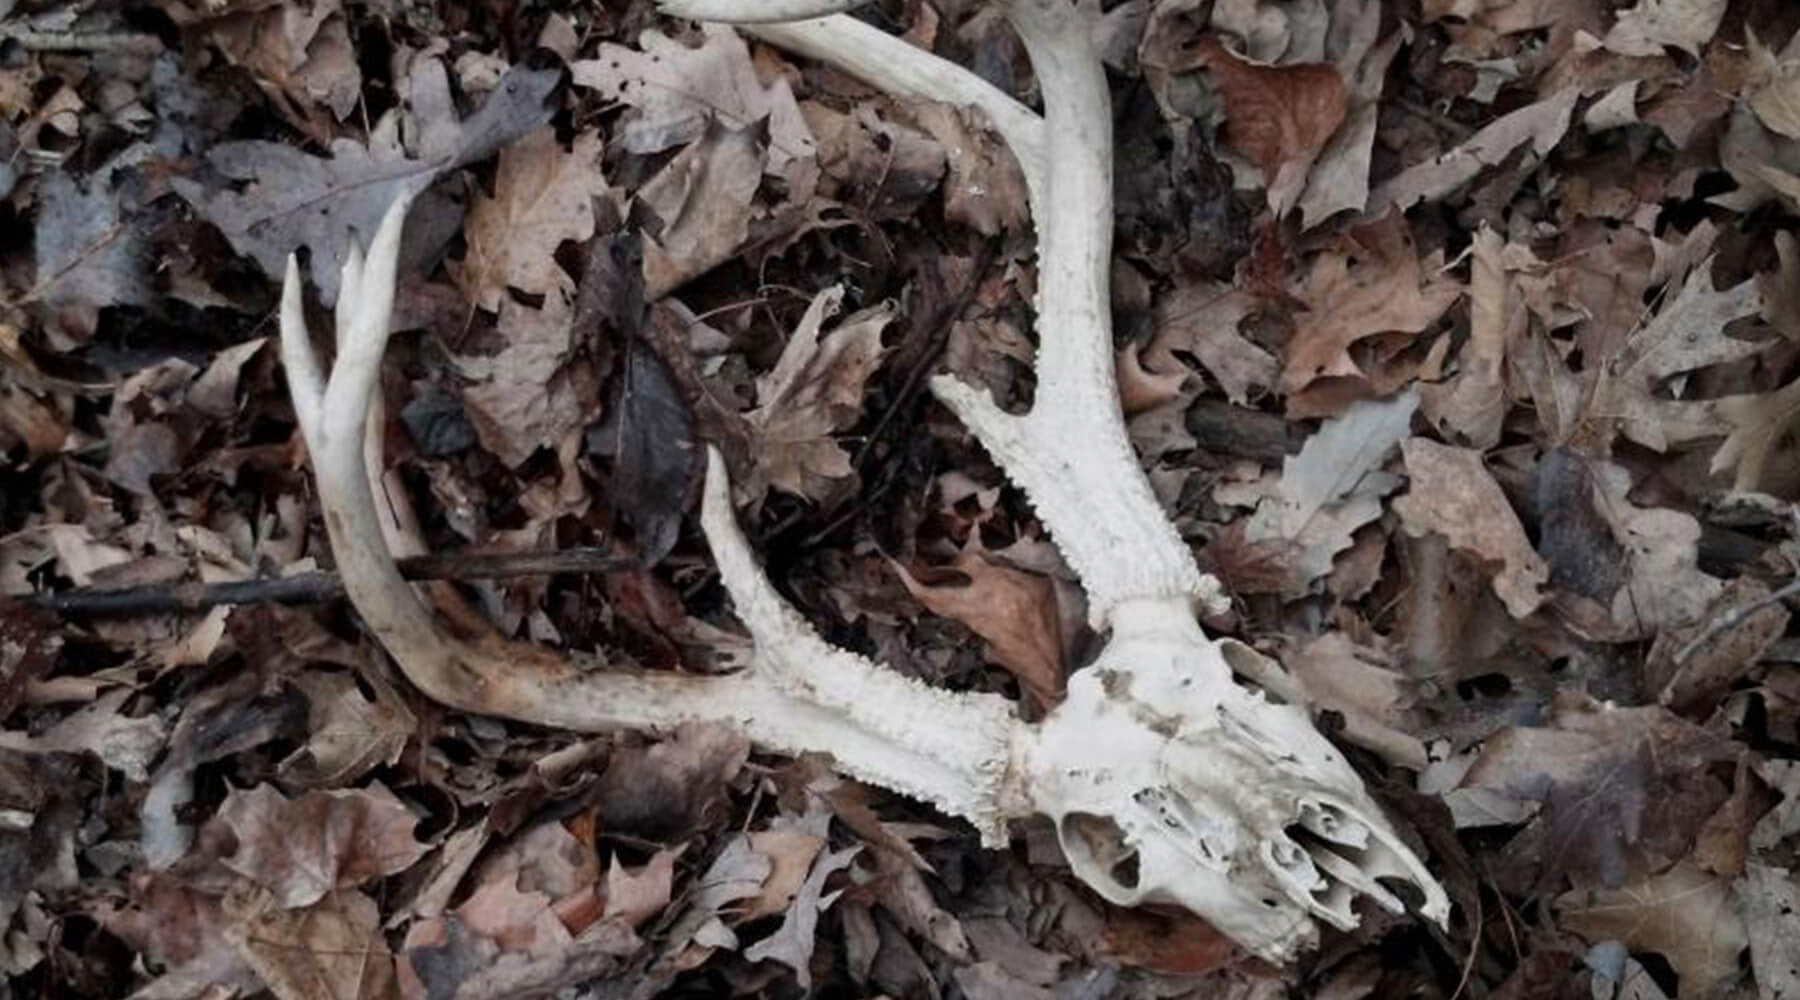 Shed Antler Hunting: The Aftermath of EHD